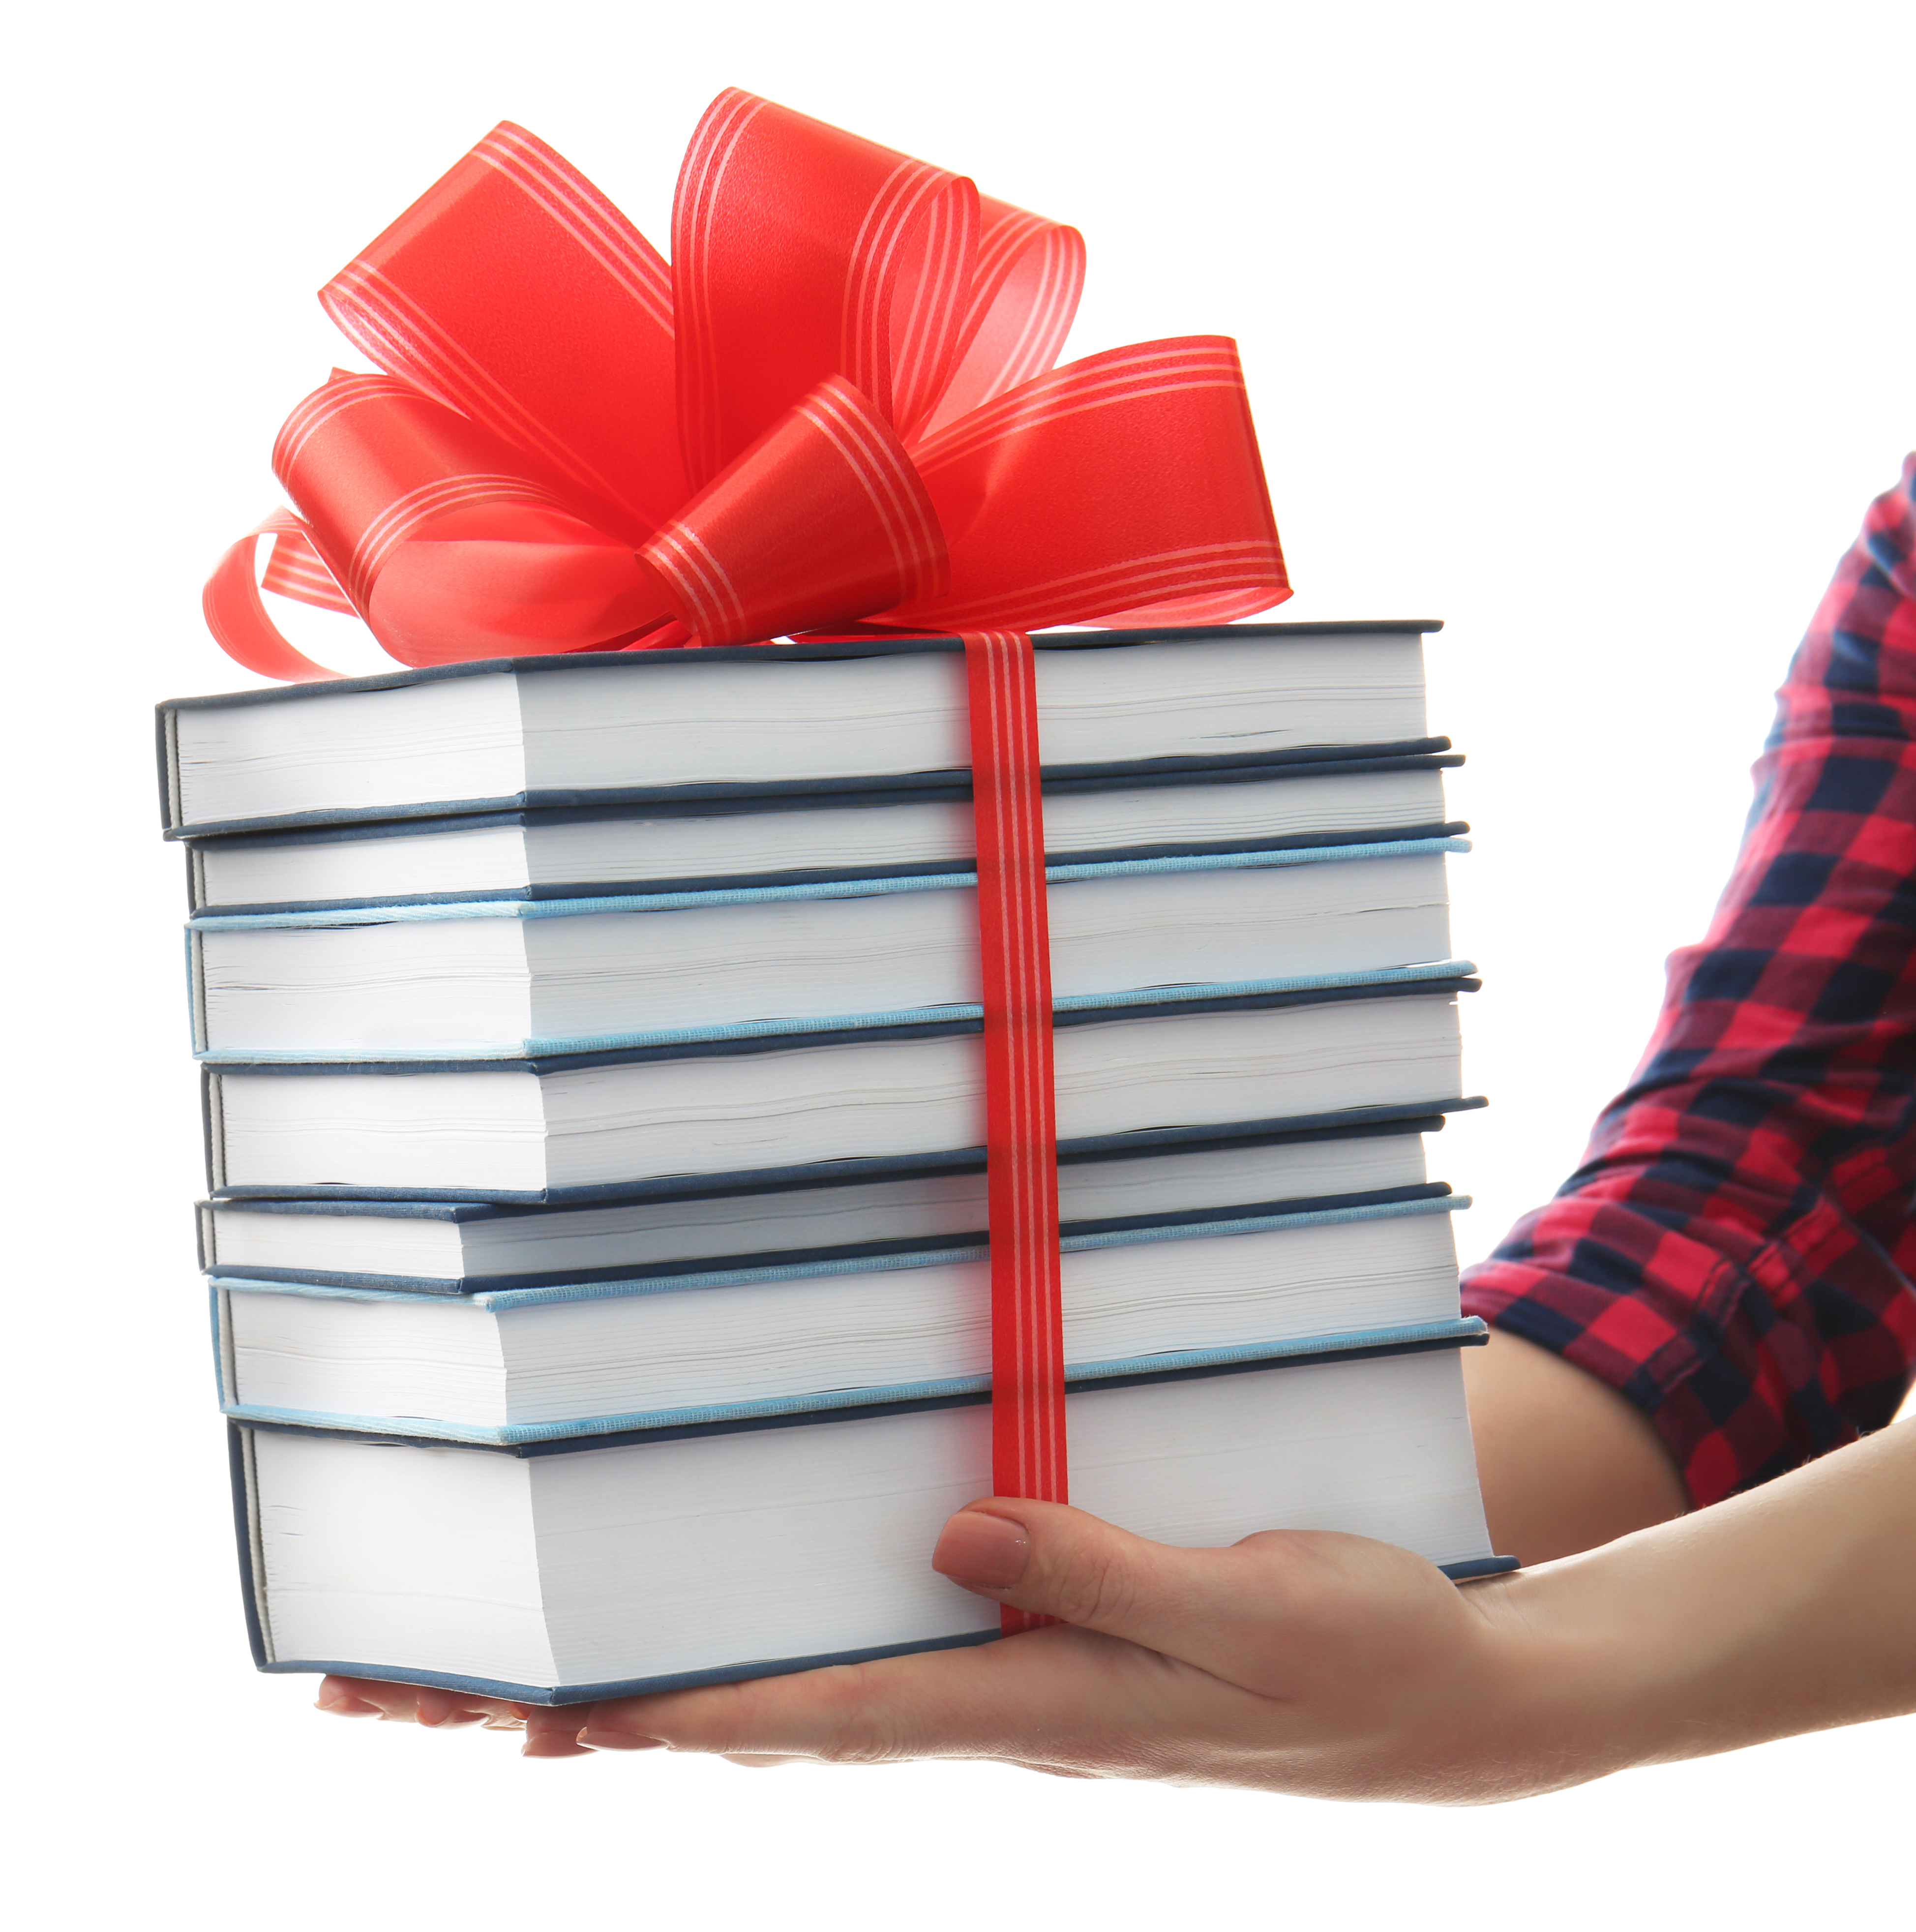 woman-holding-stack-books-with-ribbon-as-gift-white-background